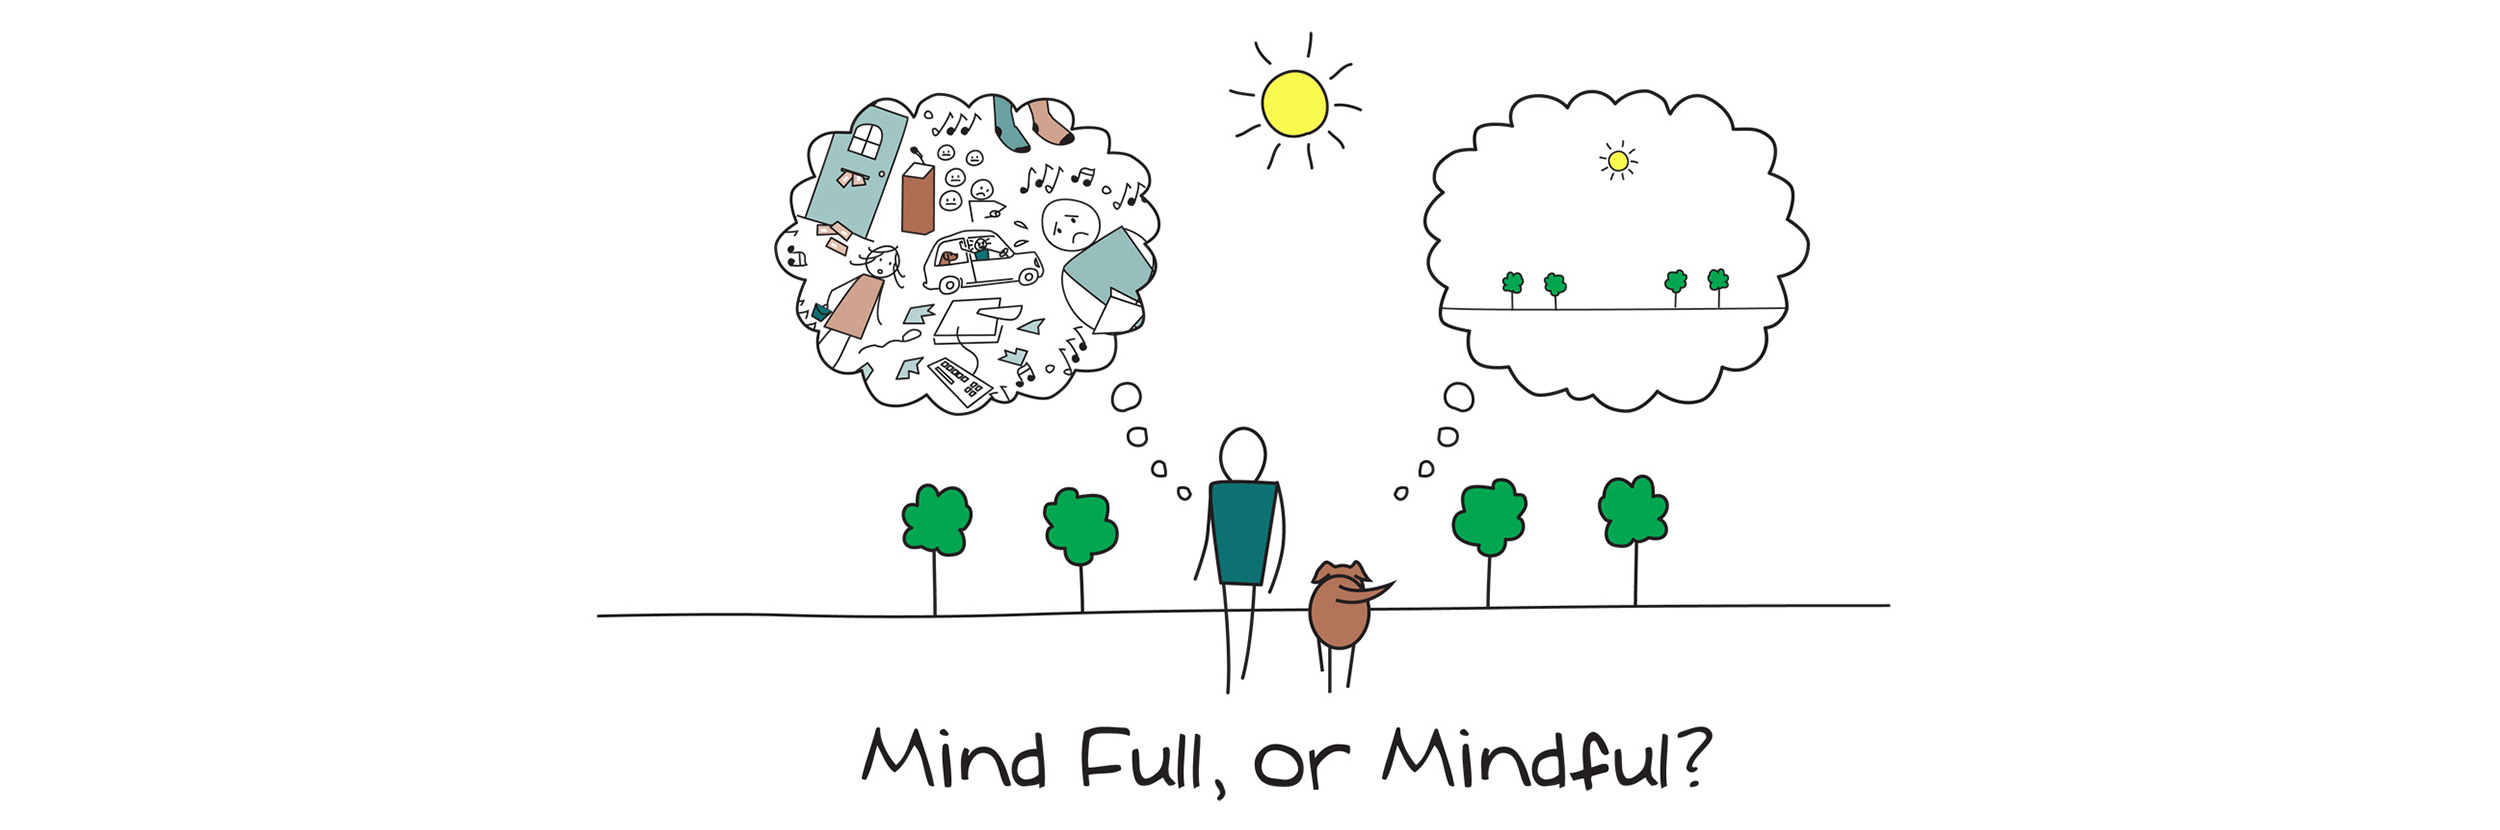 Life of Wellness Institute - Mind full or Mindful Stress